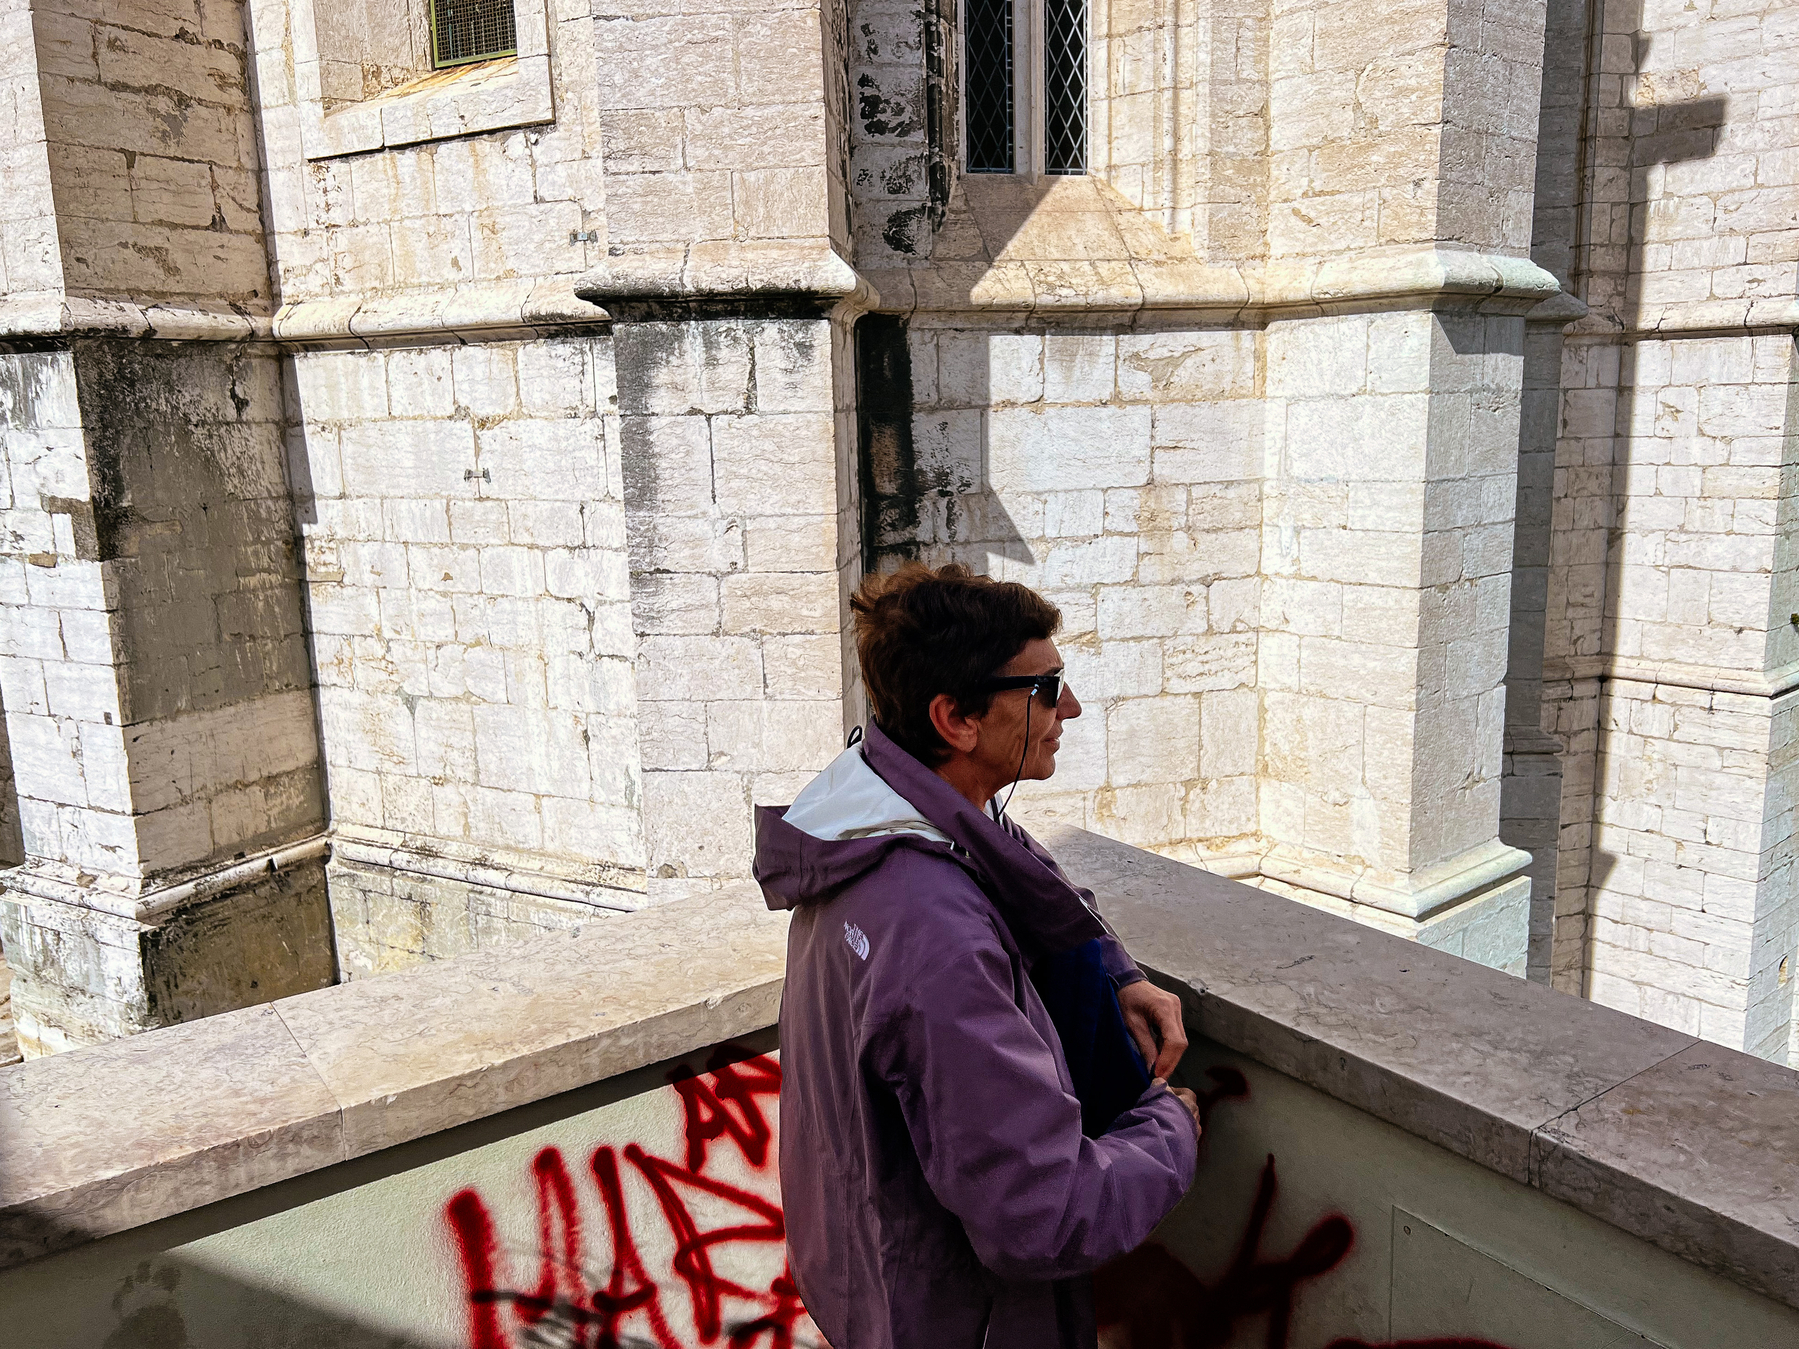 a woman looks at something outside the frame, church wall on the background